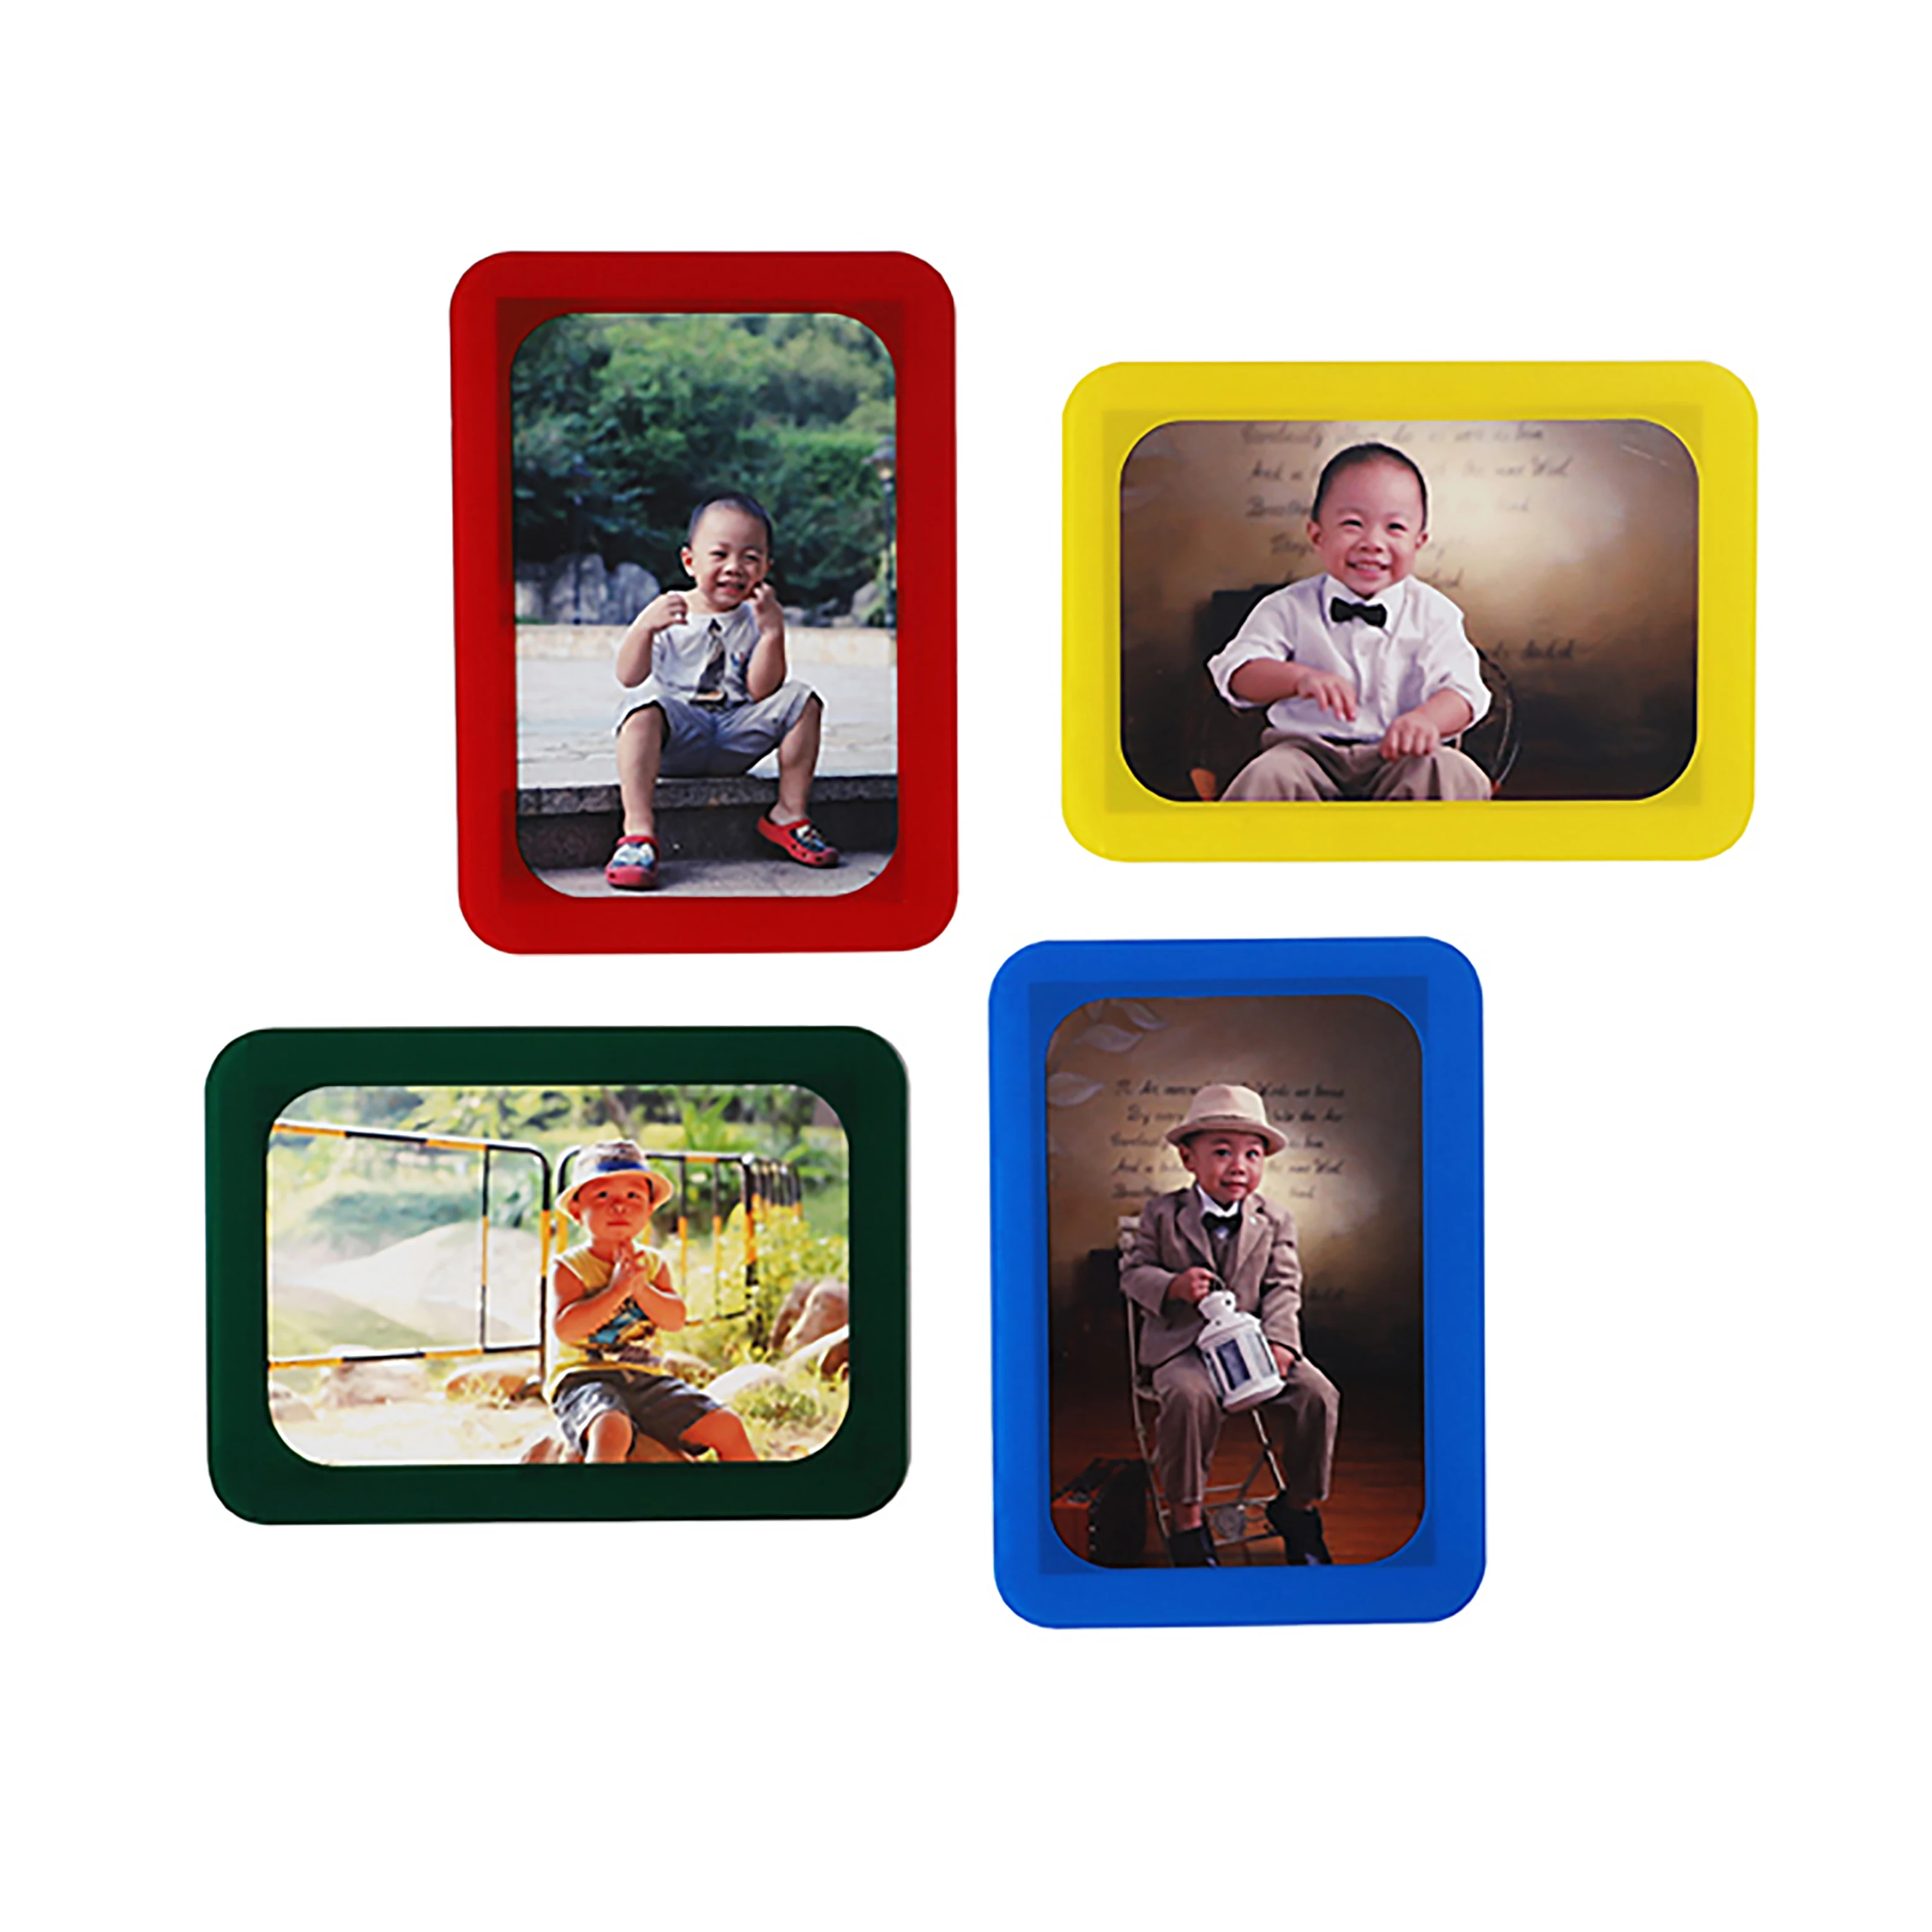 UCI New Arrival 2021 Reusable Sticky Photo Frame 4 x 6 inch Removable Photo Frame Cling to smooth glossy surface